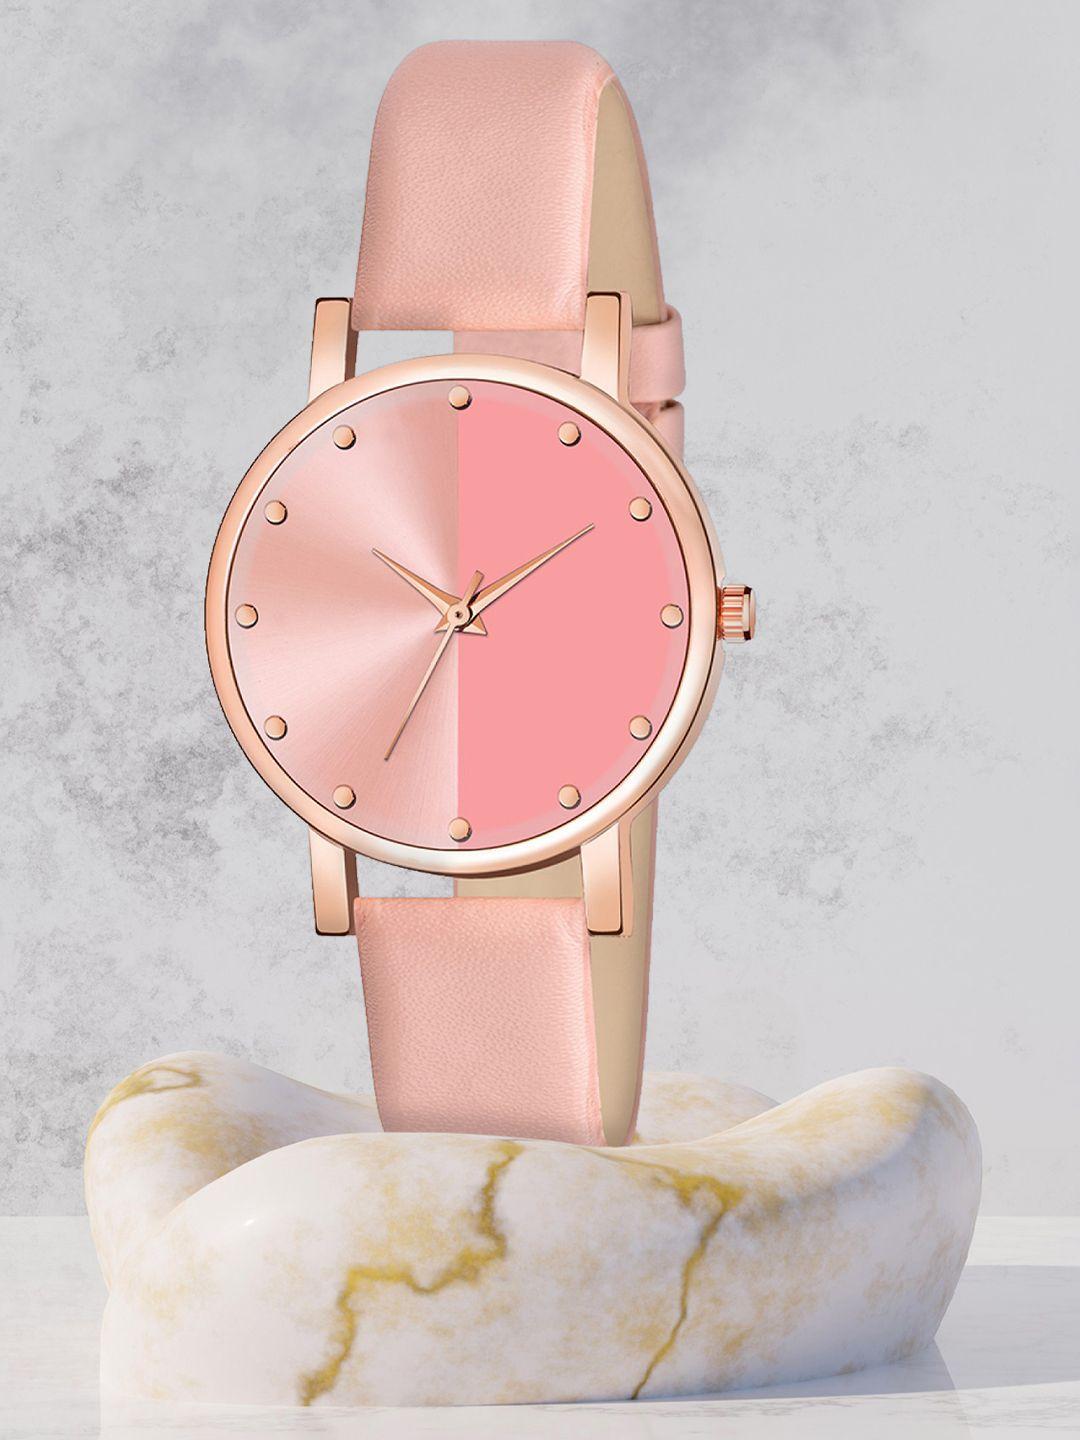 shocknshop-women-pink-dial-&-pink-leather-straps-analogue-watch-wch48pink-pink